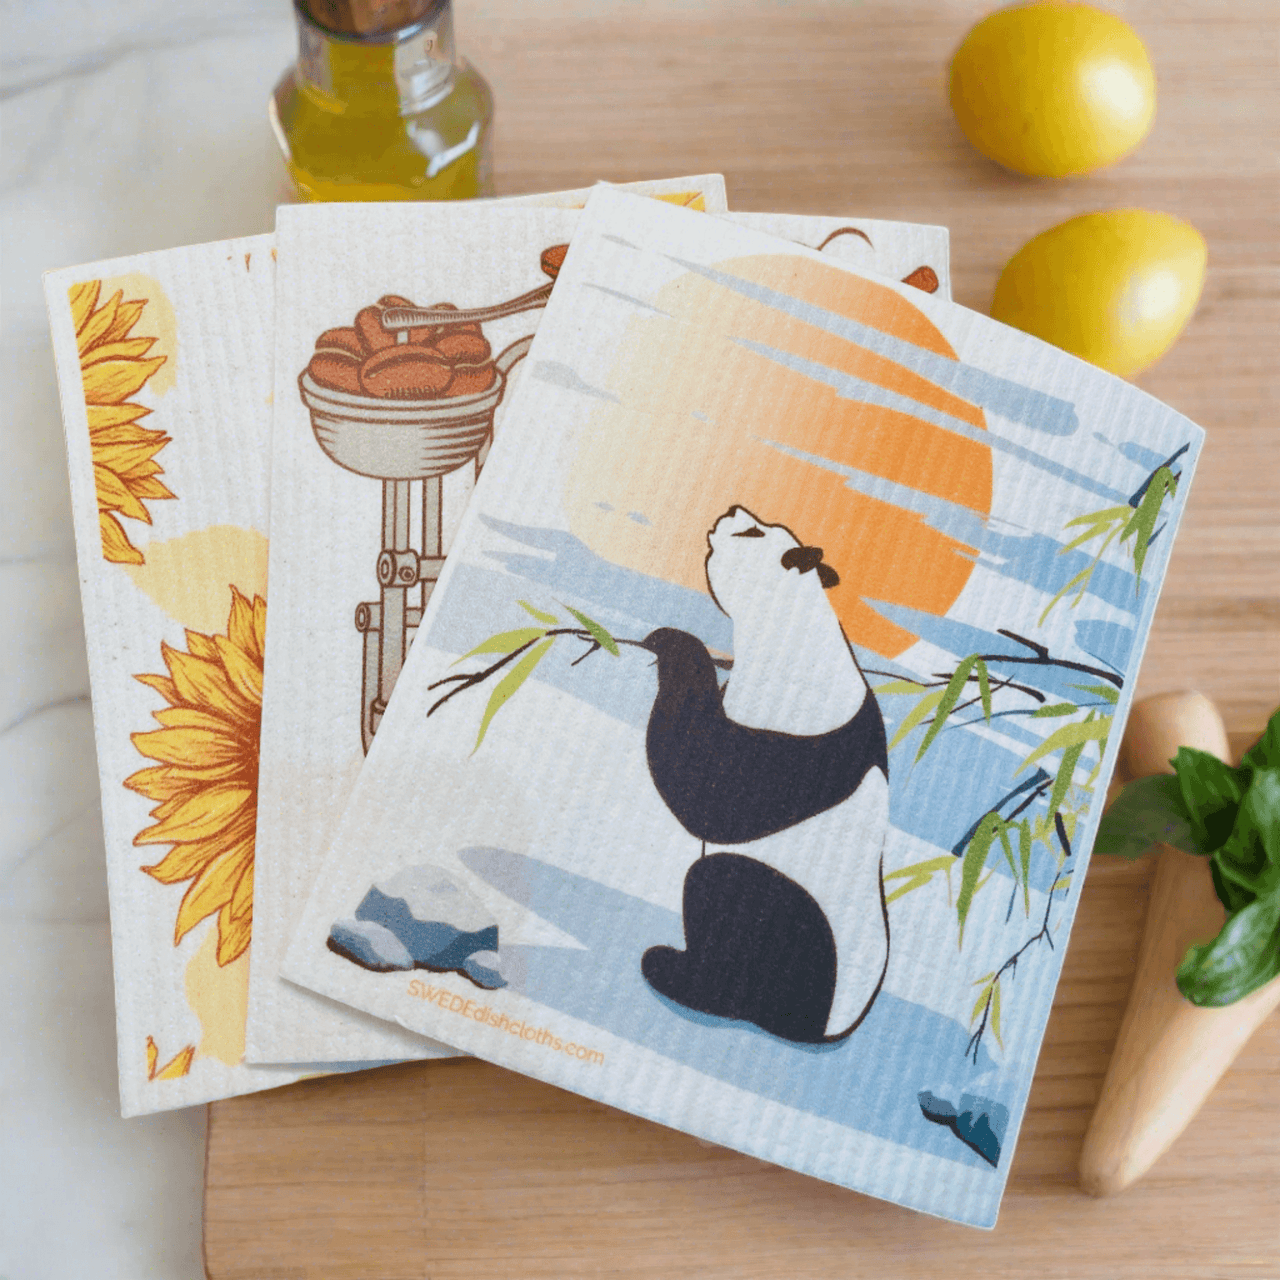 Illustrated dishcloths with panda, sunflower, and kitchen motifs on wooden surface with lemons and bottle of oil.